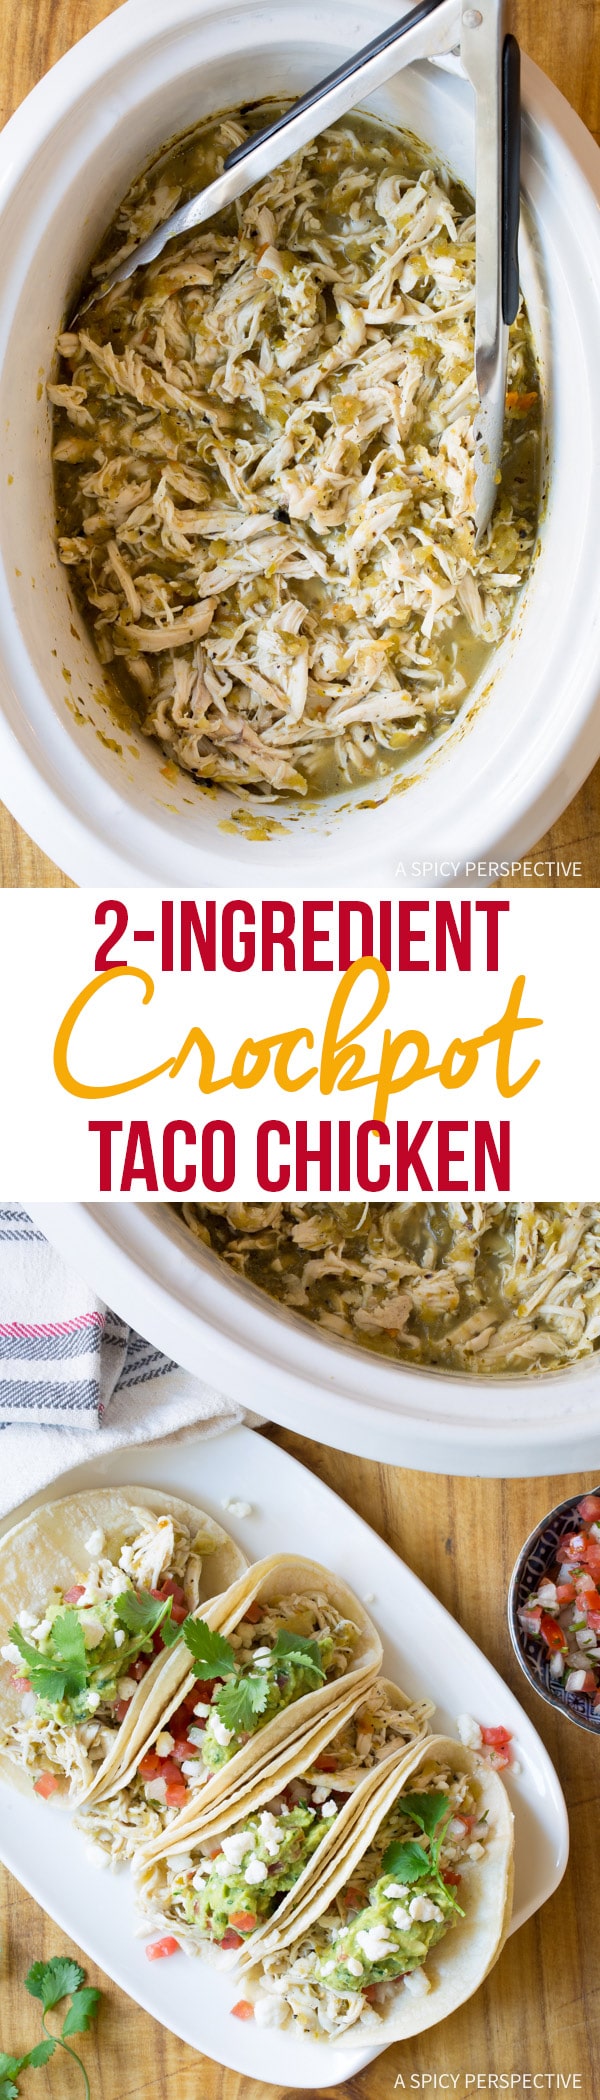 The Best 2-Ingredient Crockpot Taco Chicken (Low Carb, Low Fat, Gluten Free!) #slowcooker